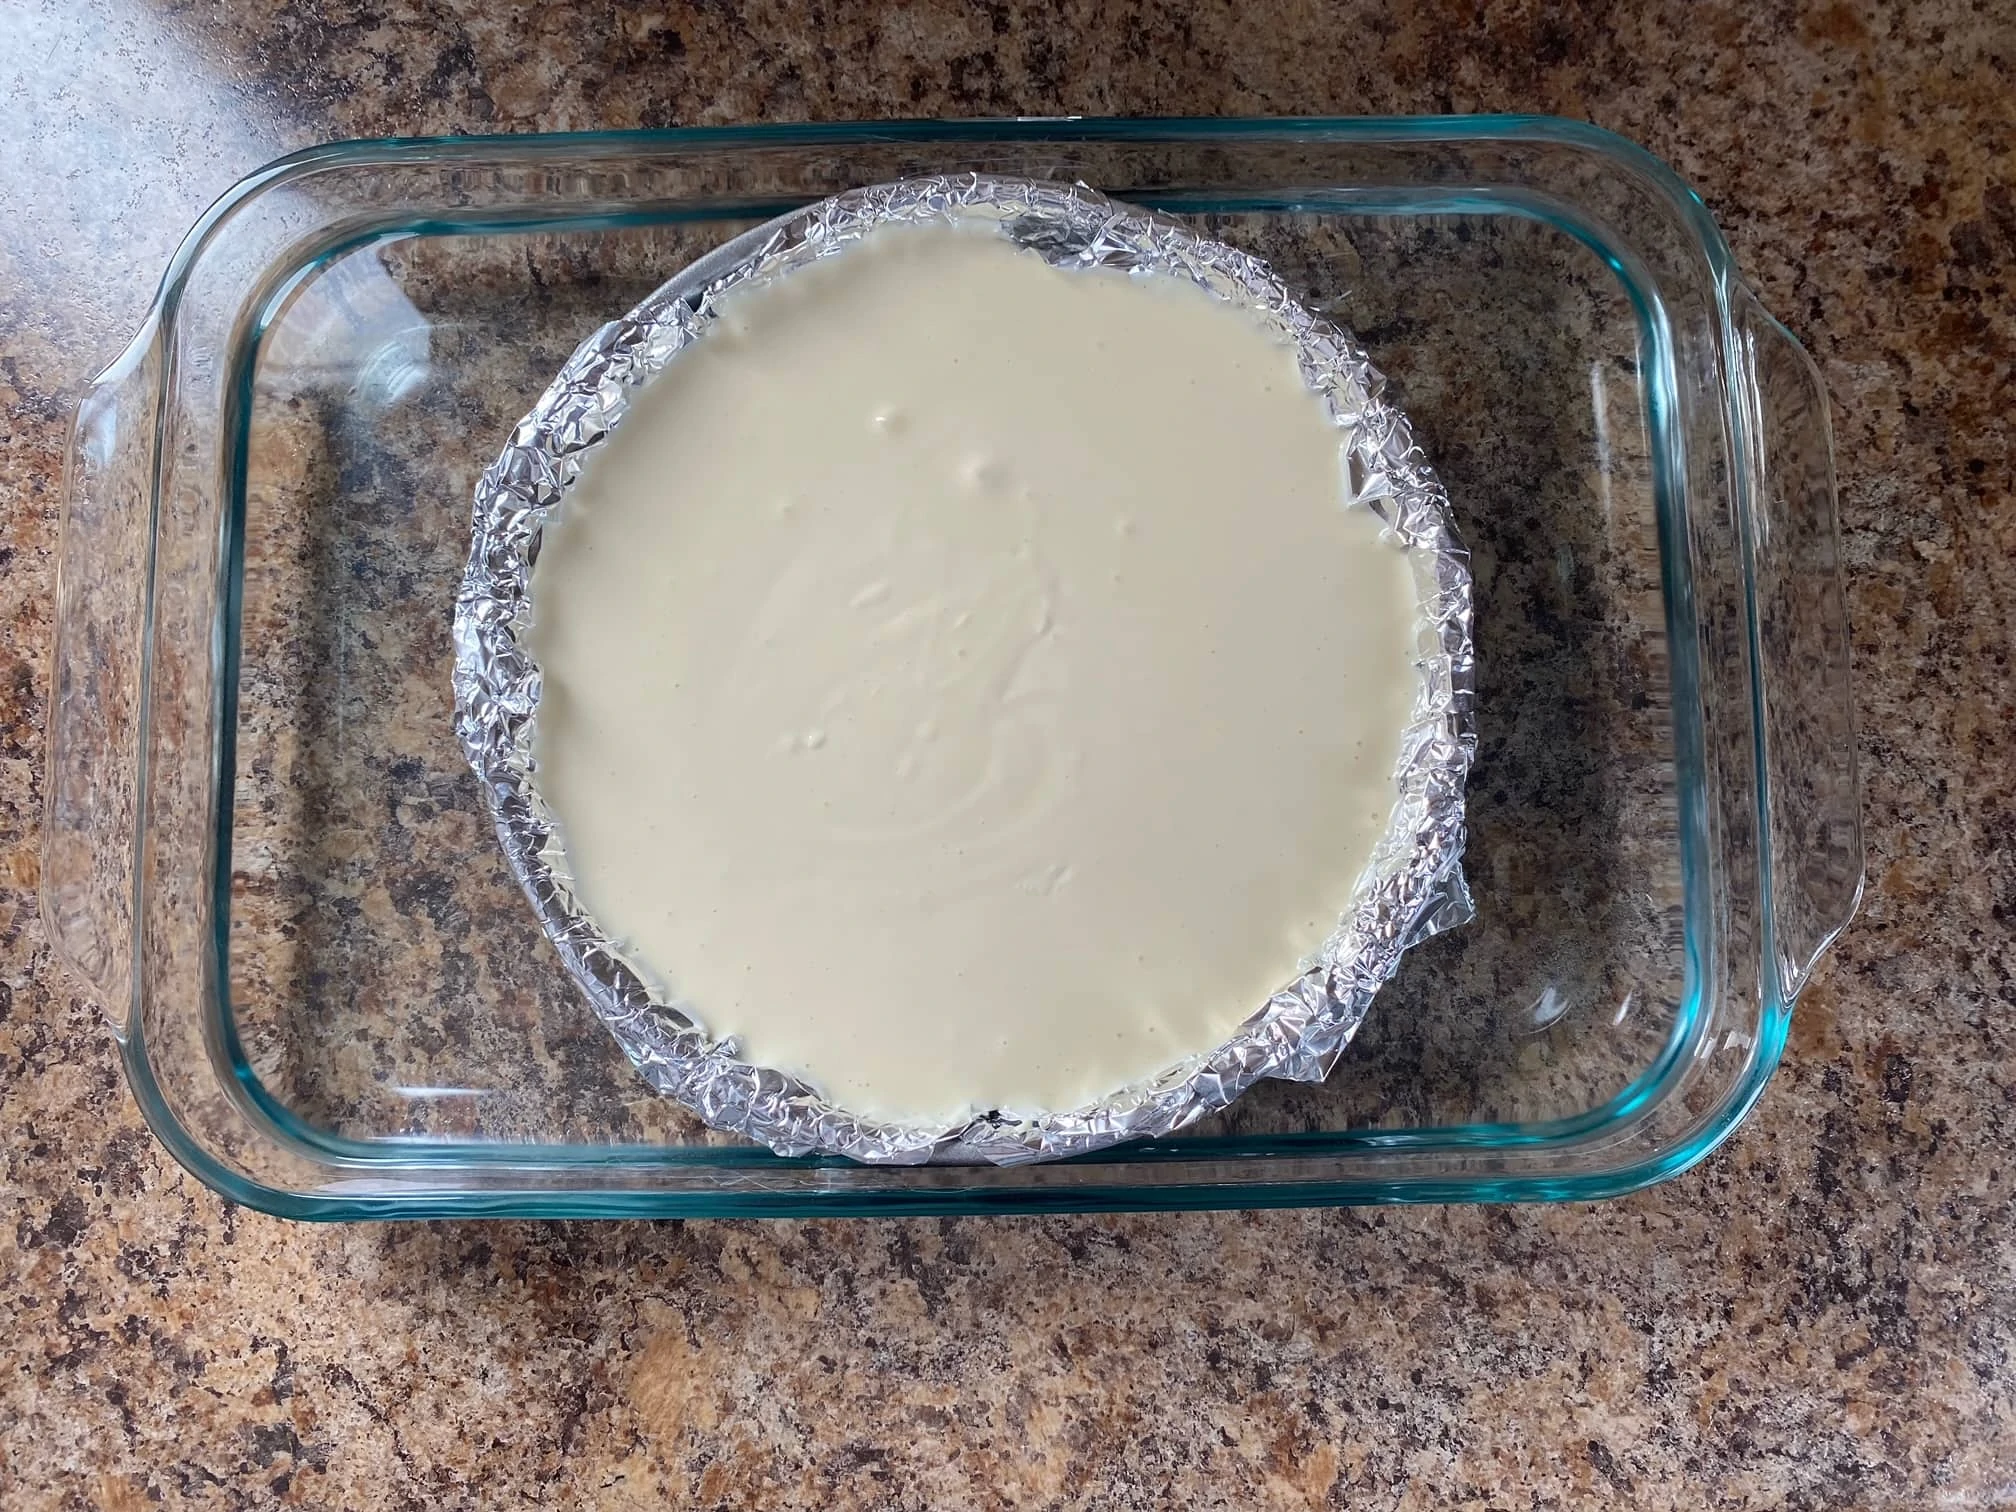 Cheesecake in a foil lined cake pan.  The cheesecake pan is sitting inside a large baking dish with water around it.